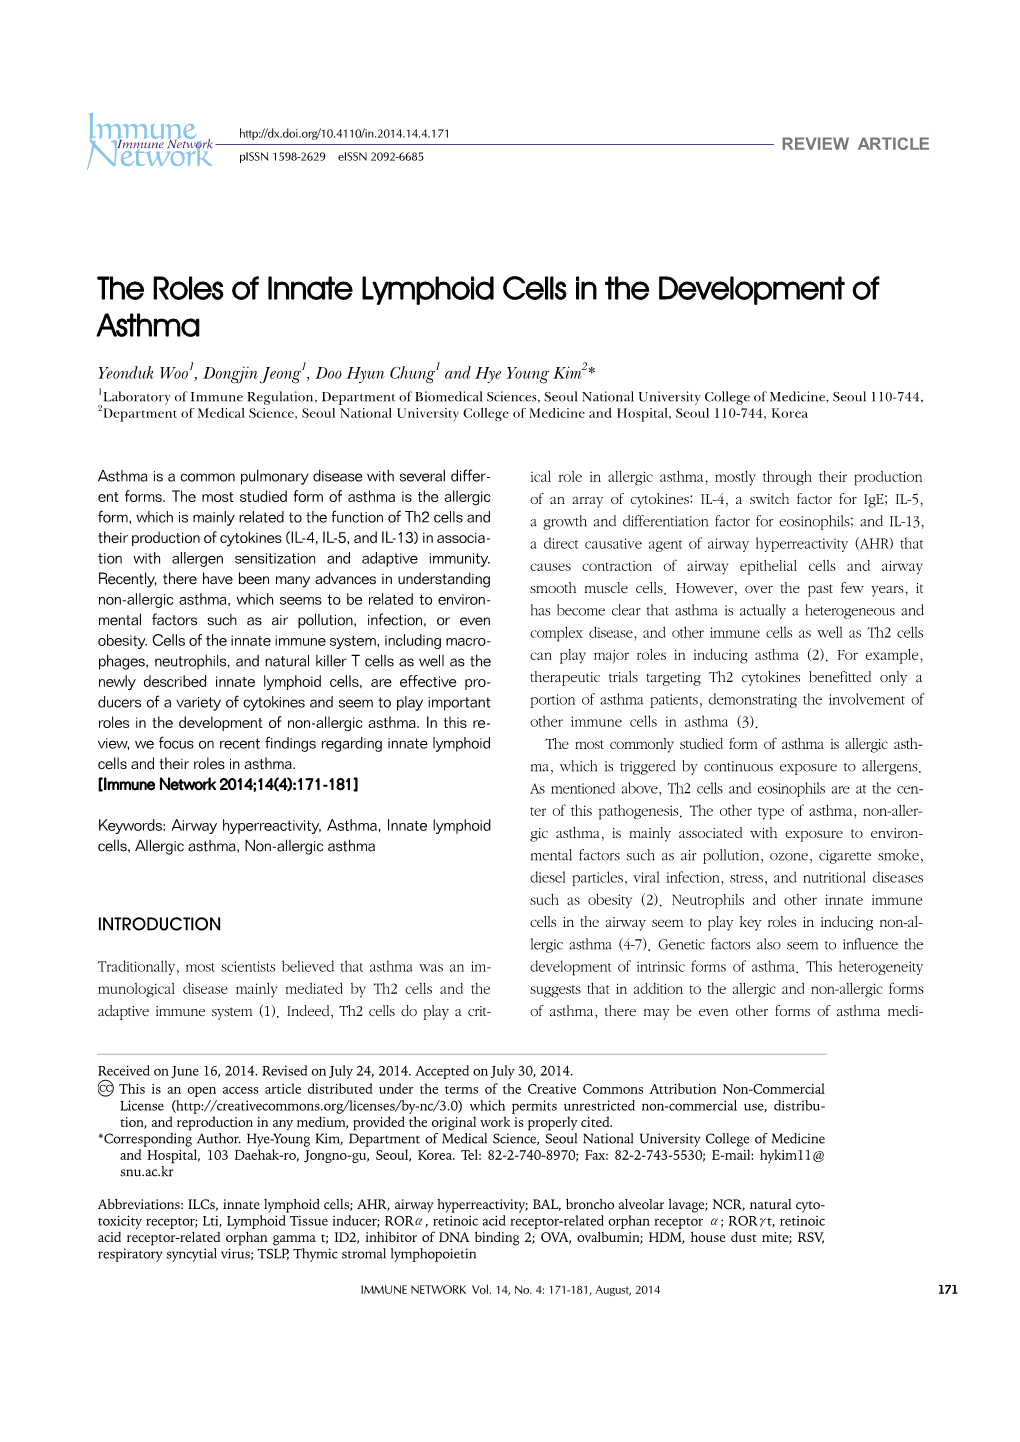 The Roles of Innate Lymphoid Cells in the Development of Asthma